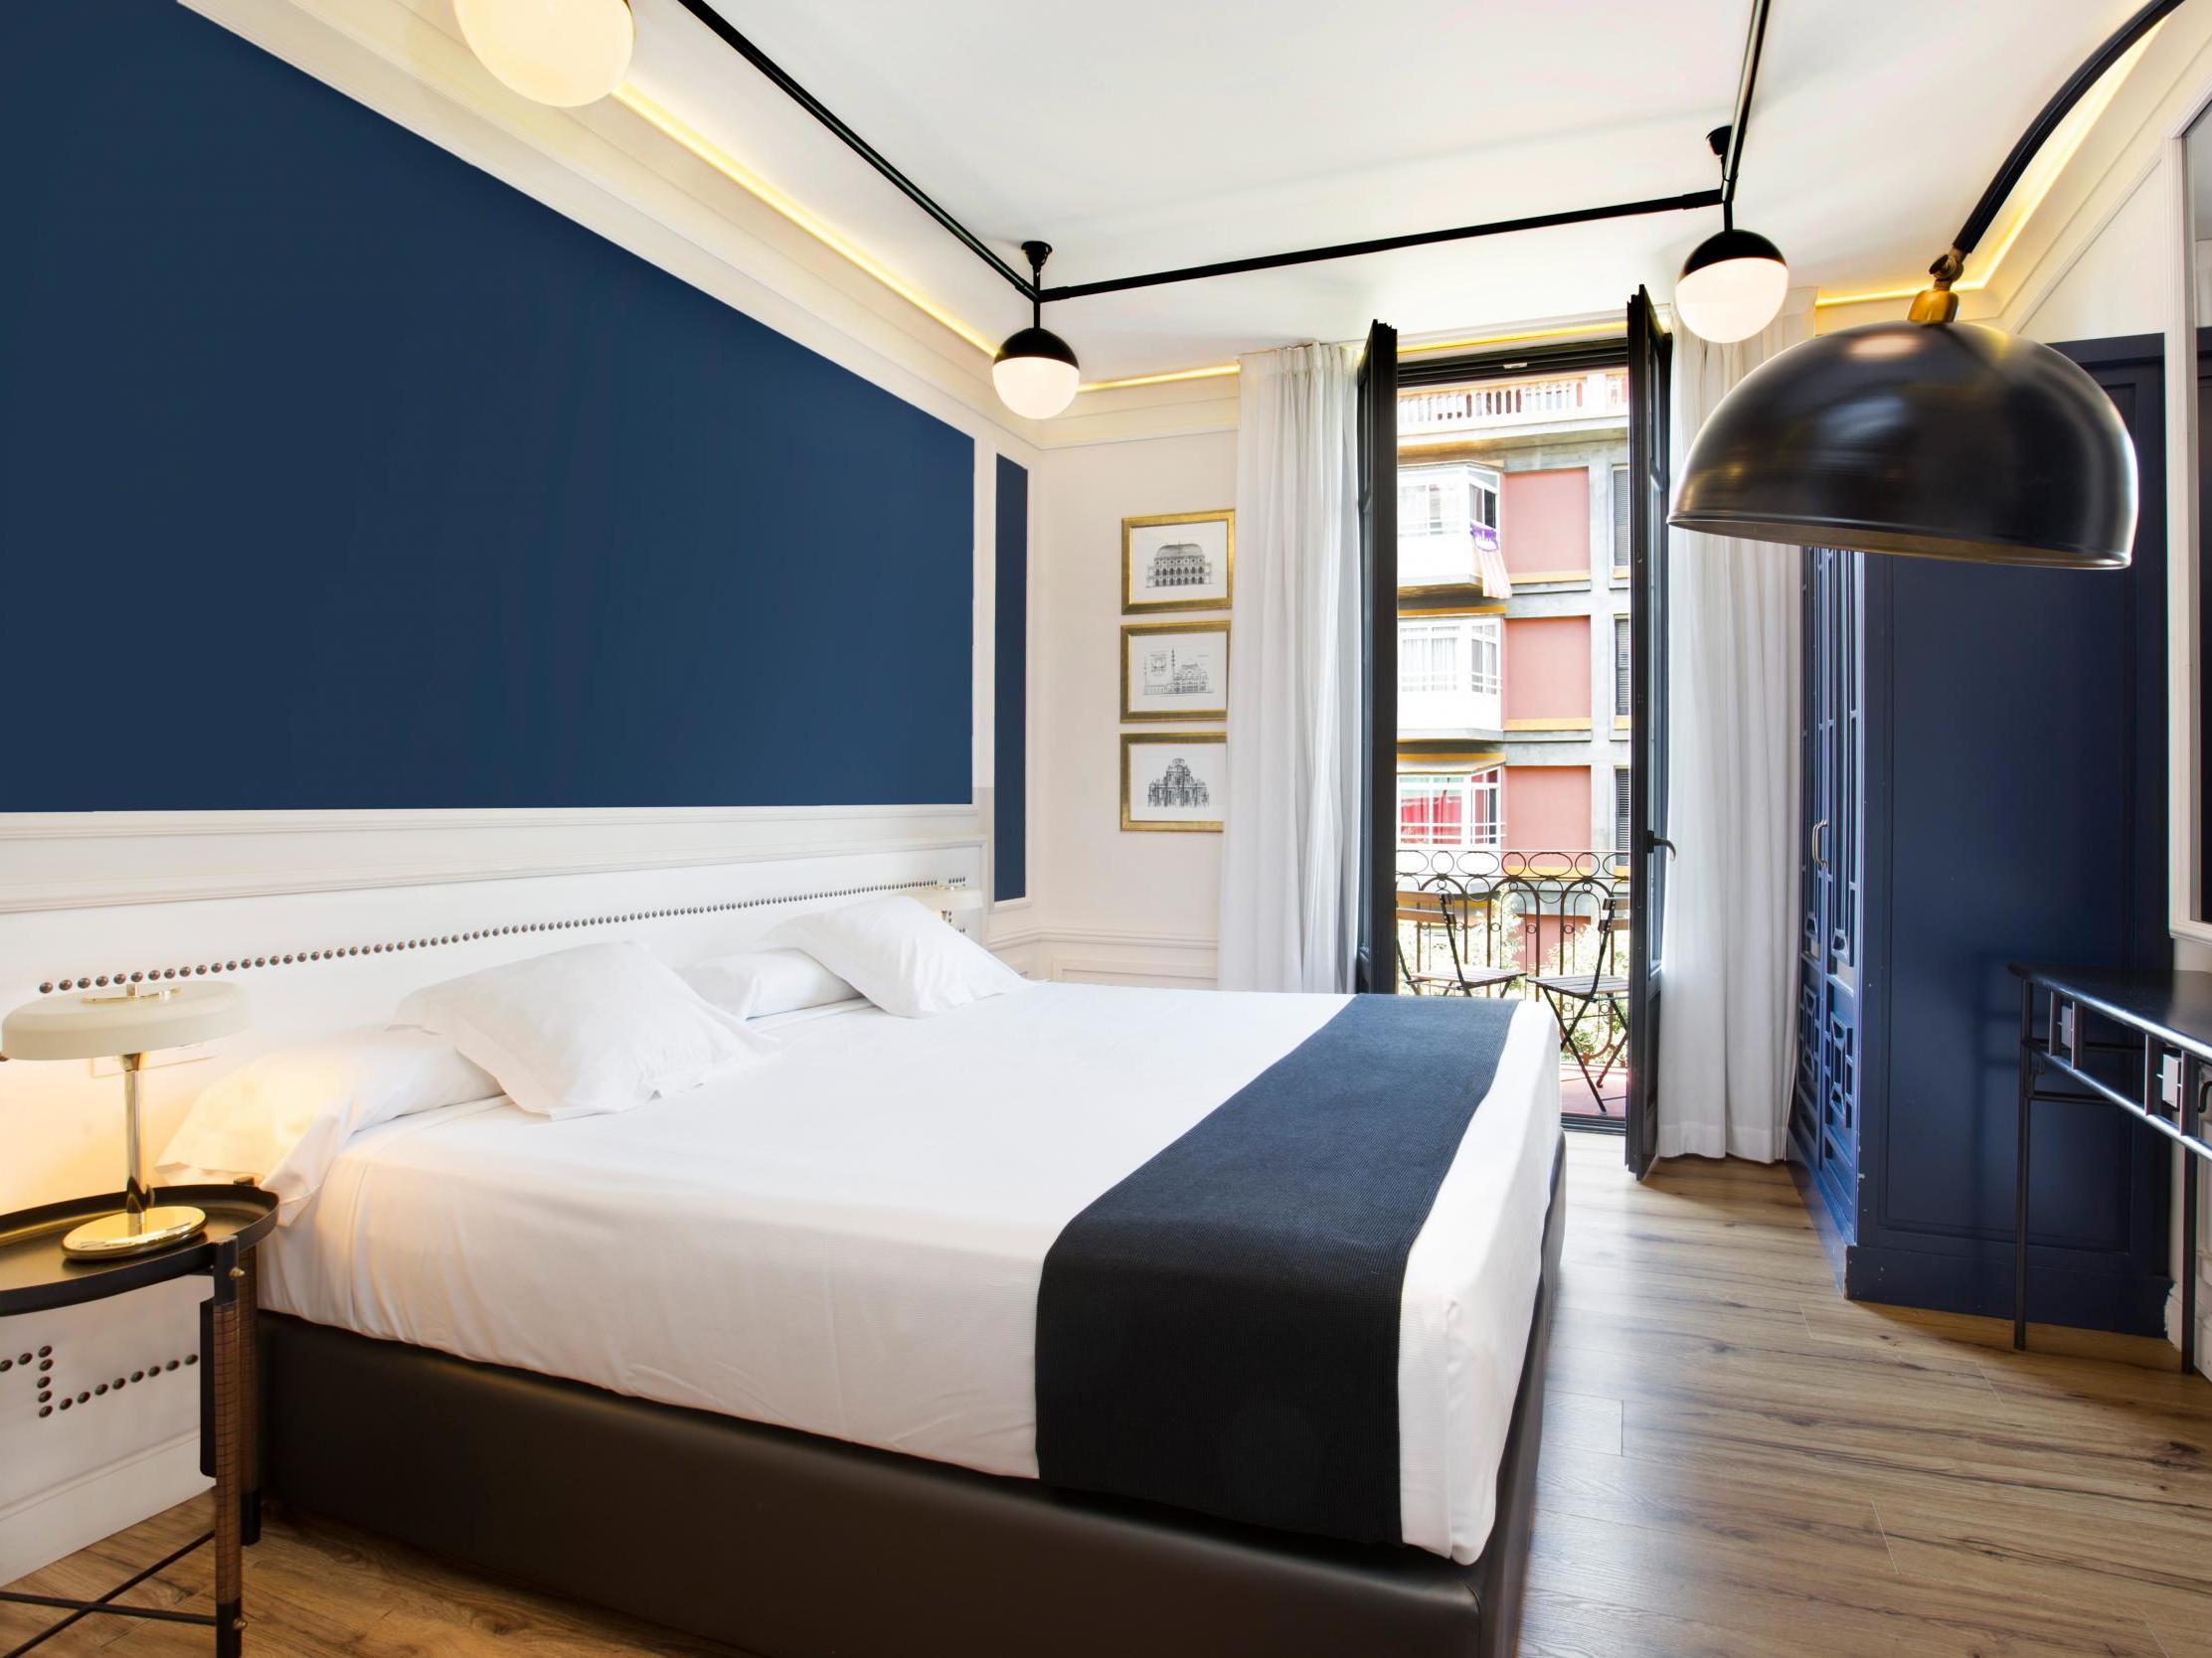 Stylish rooms, at an affordable price, await at Hotel Market